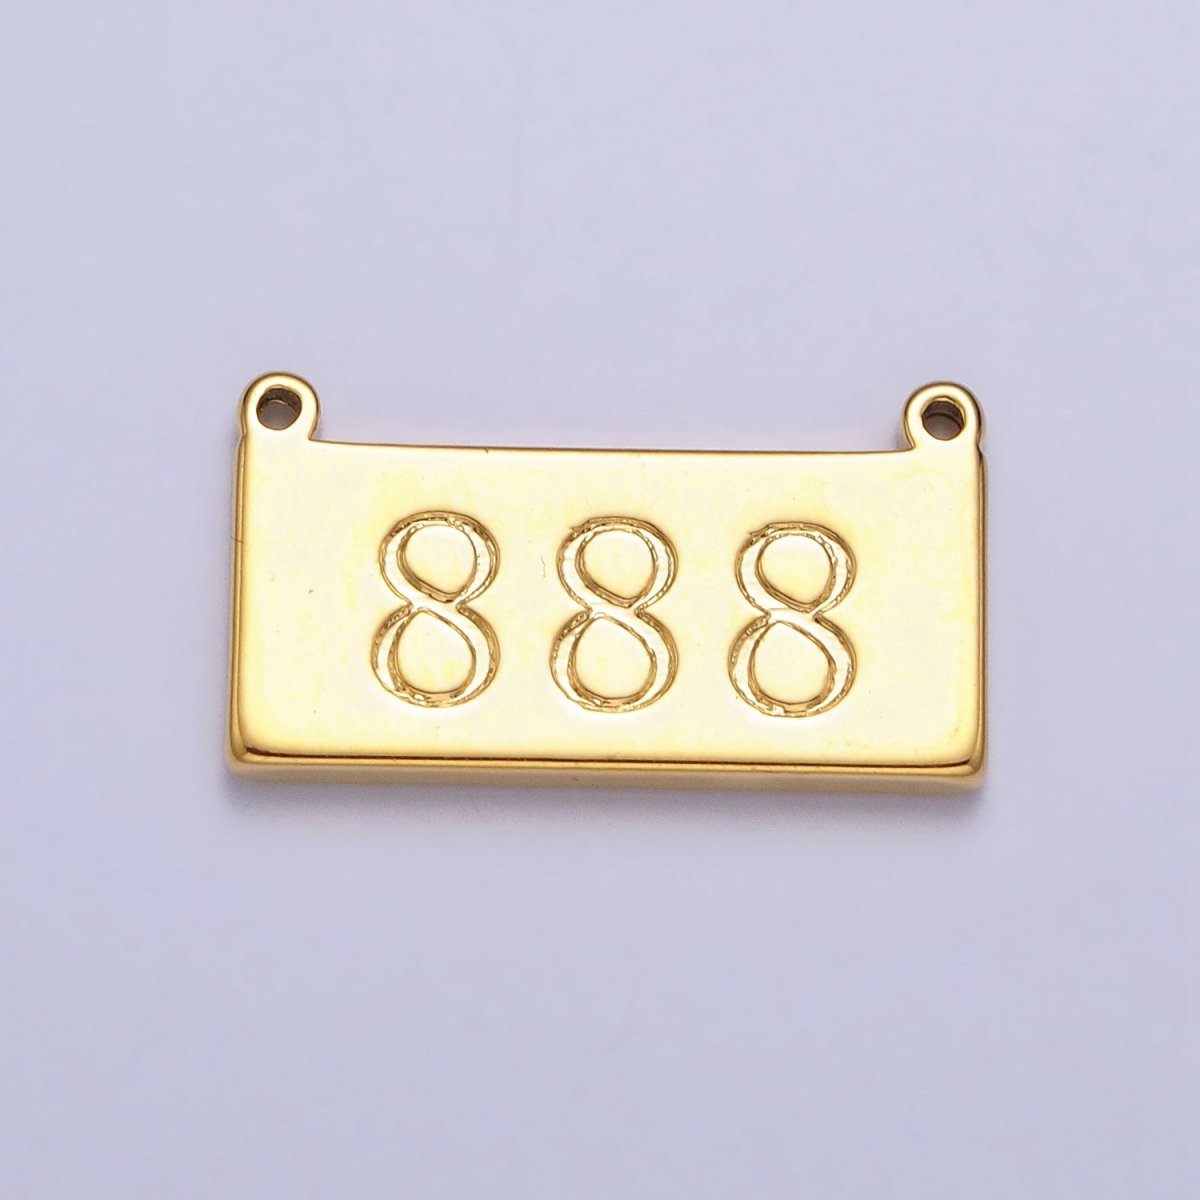 24K Gold Filled Angel Number Numerology Engraved Rectangular Tag Charm Connector | AA791 - AA800 - DLUXCA